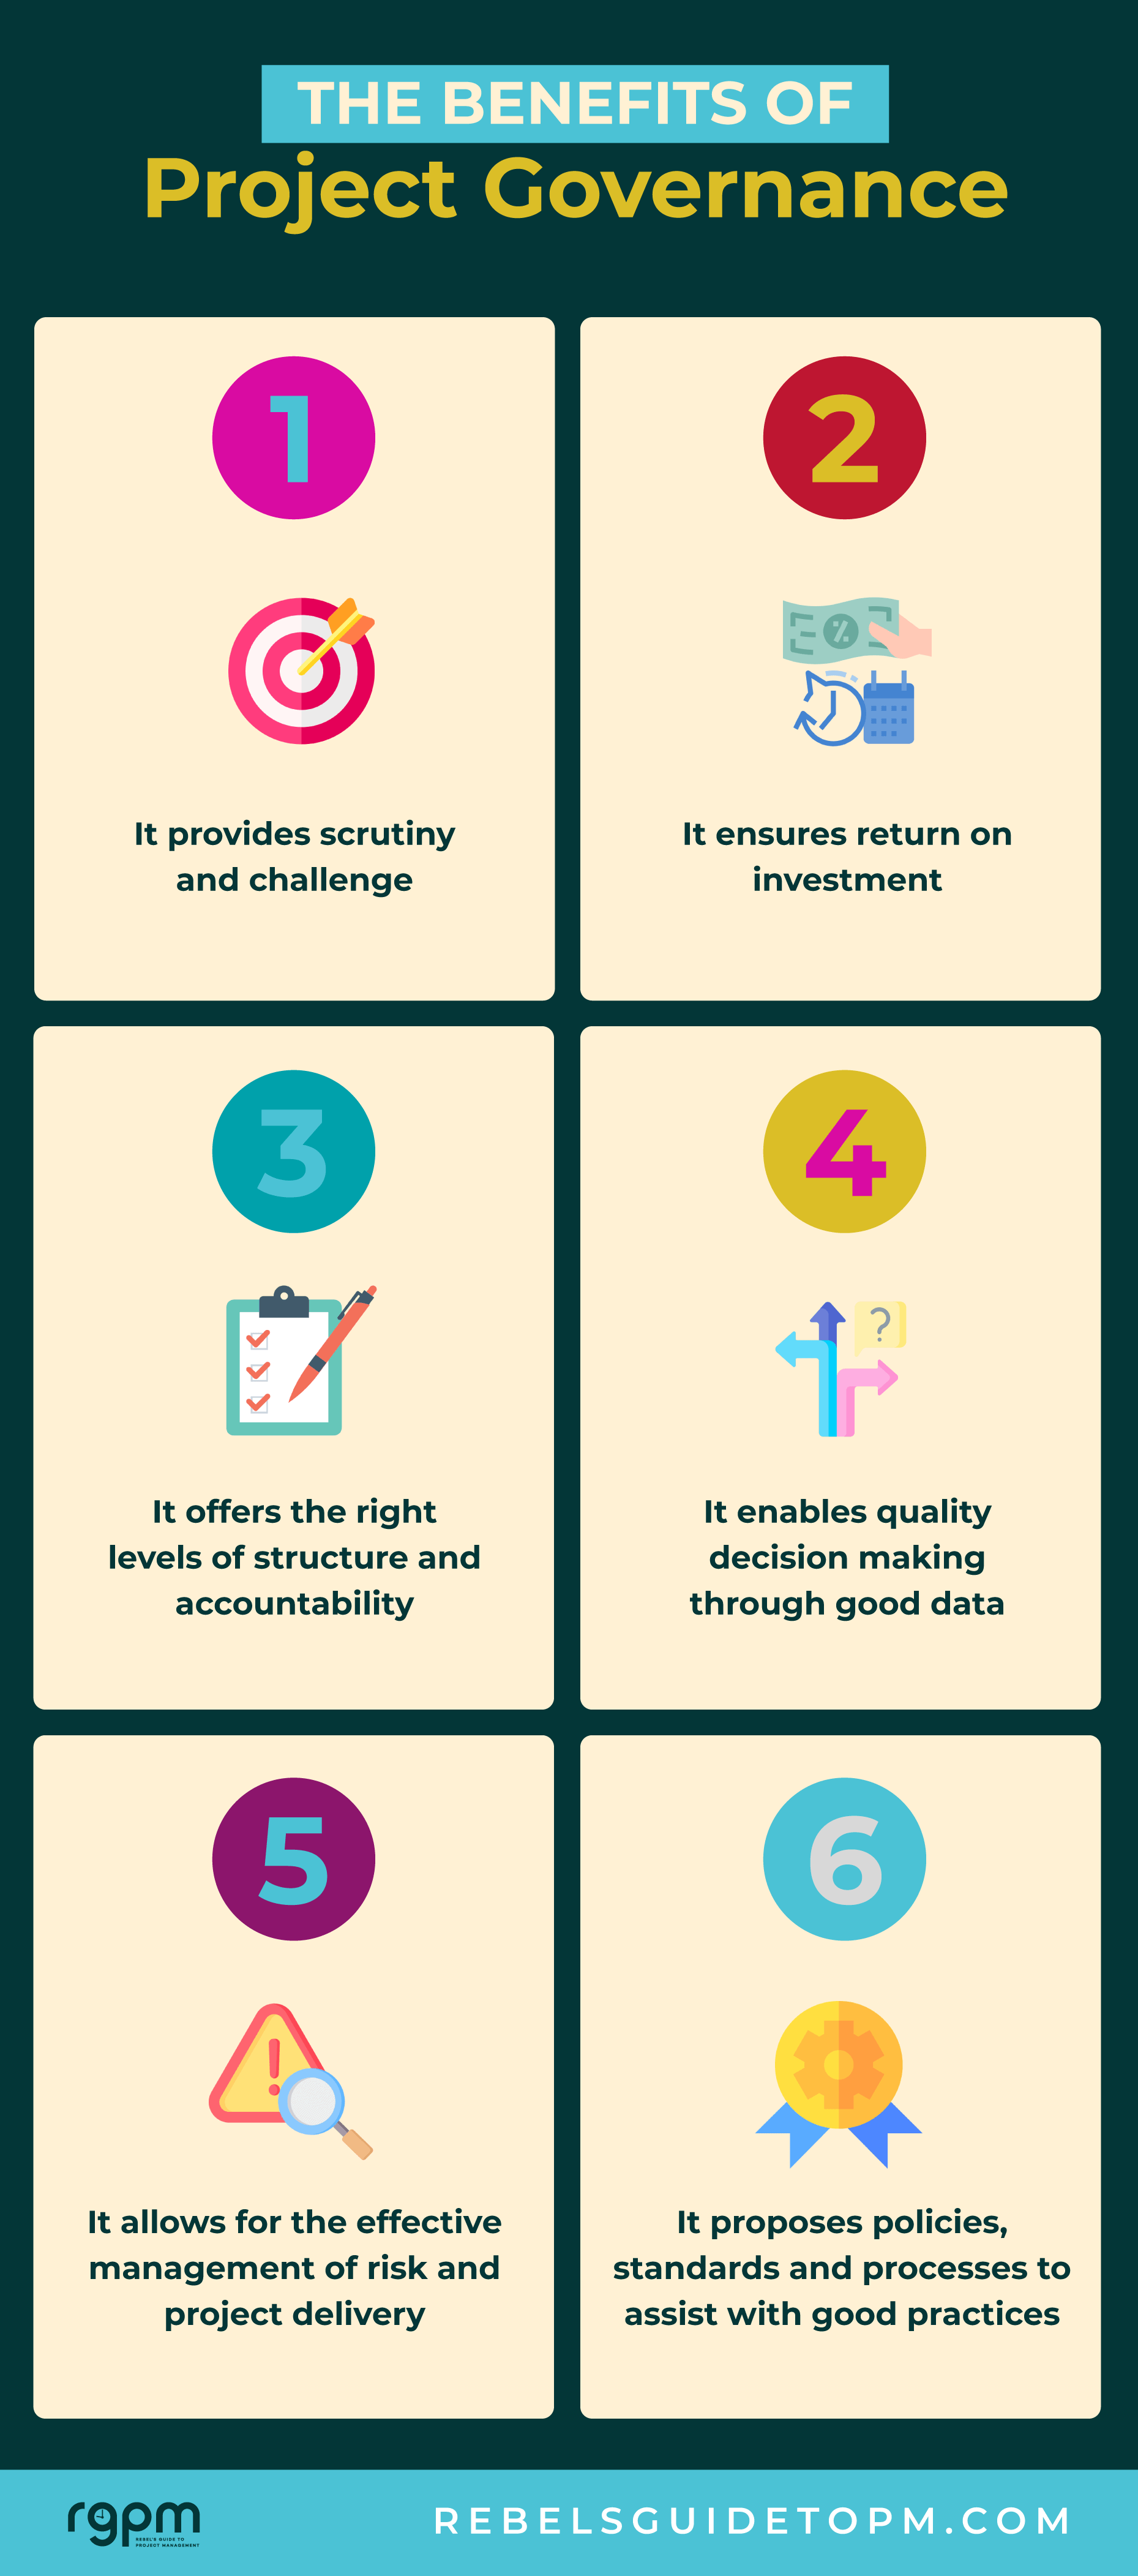 Benefits of project governance listed in an infographic